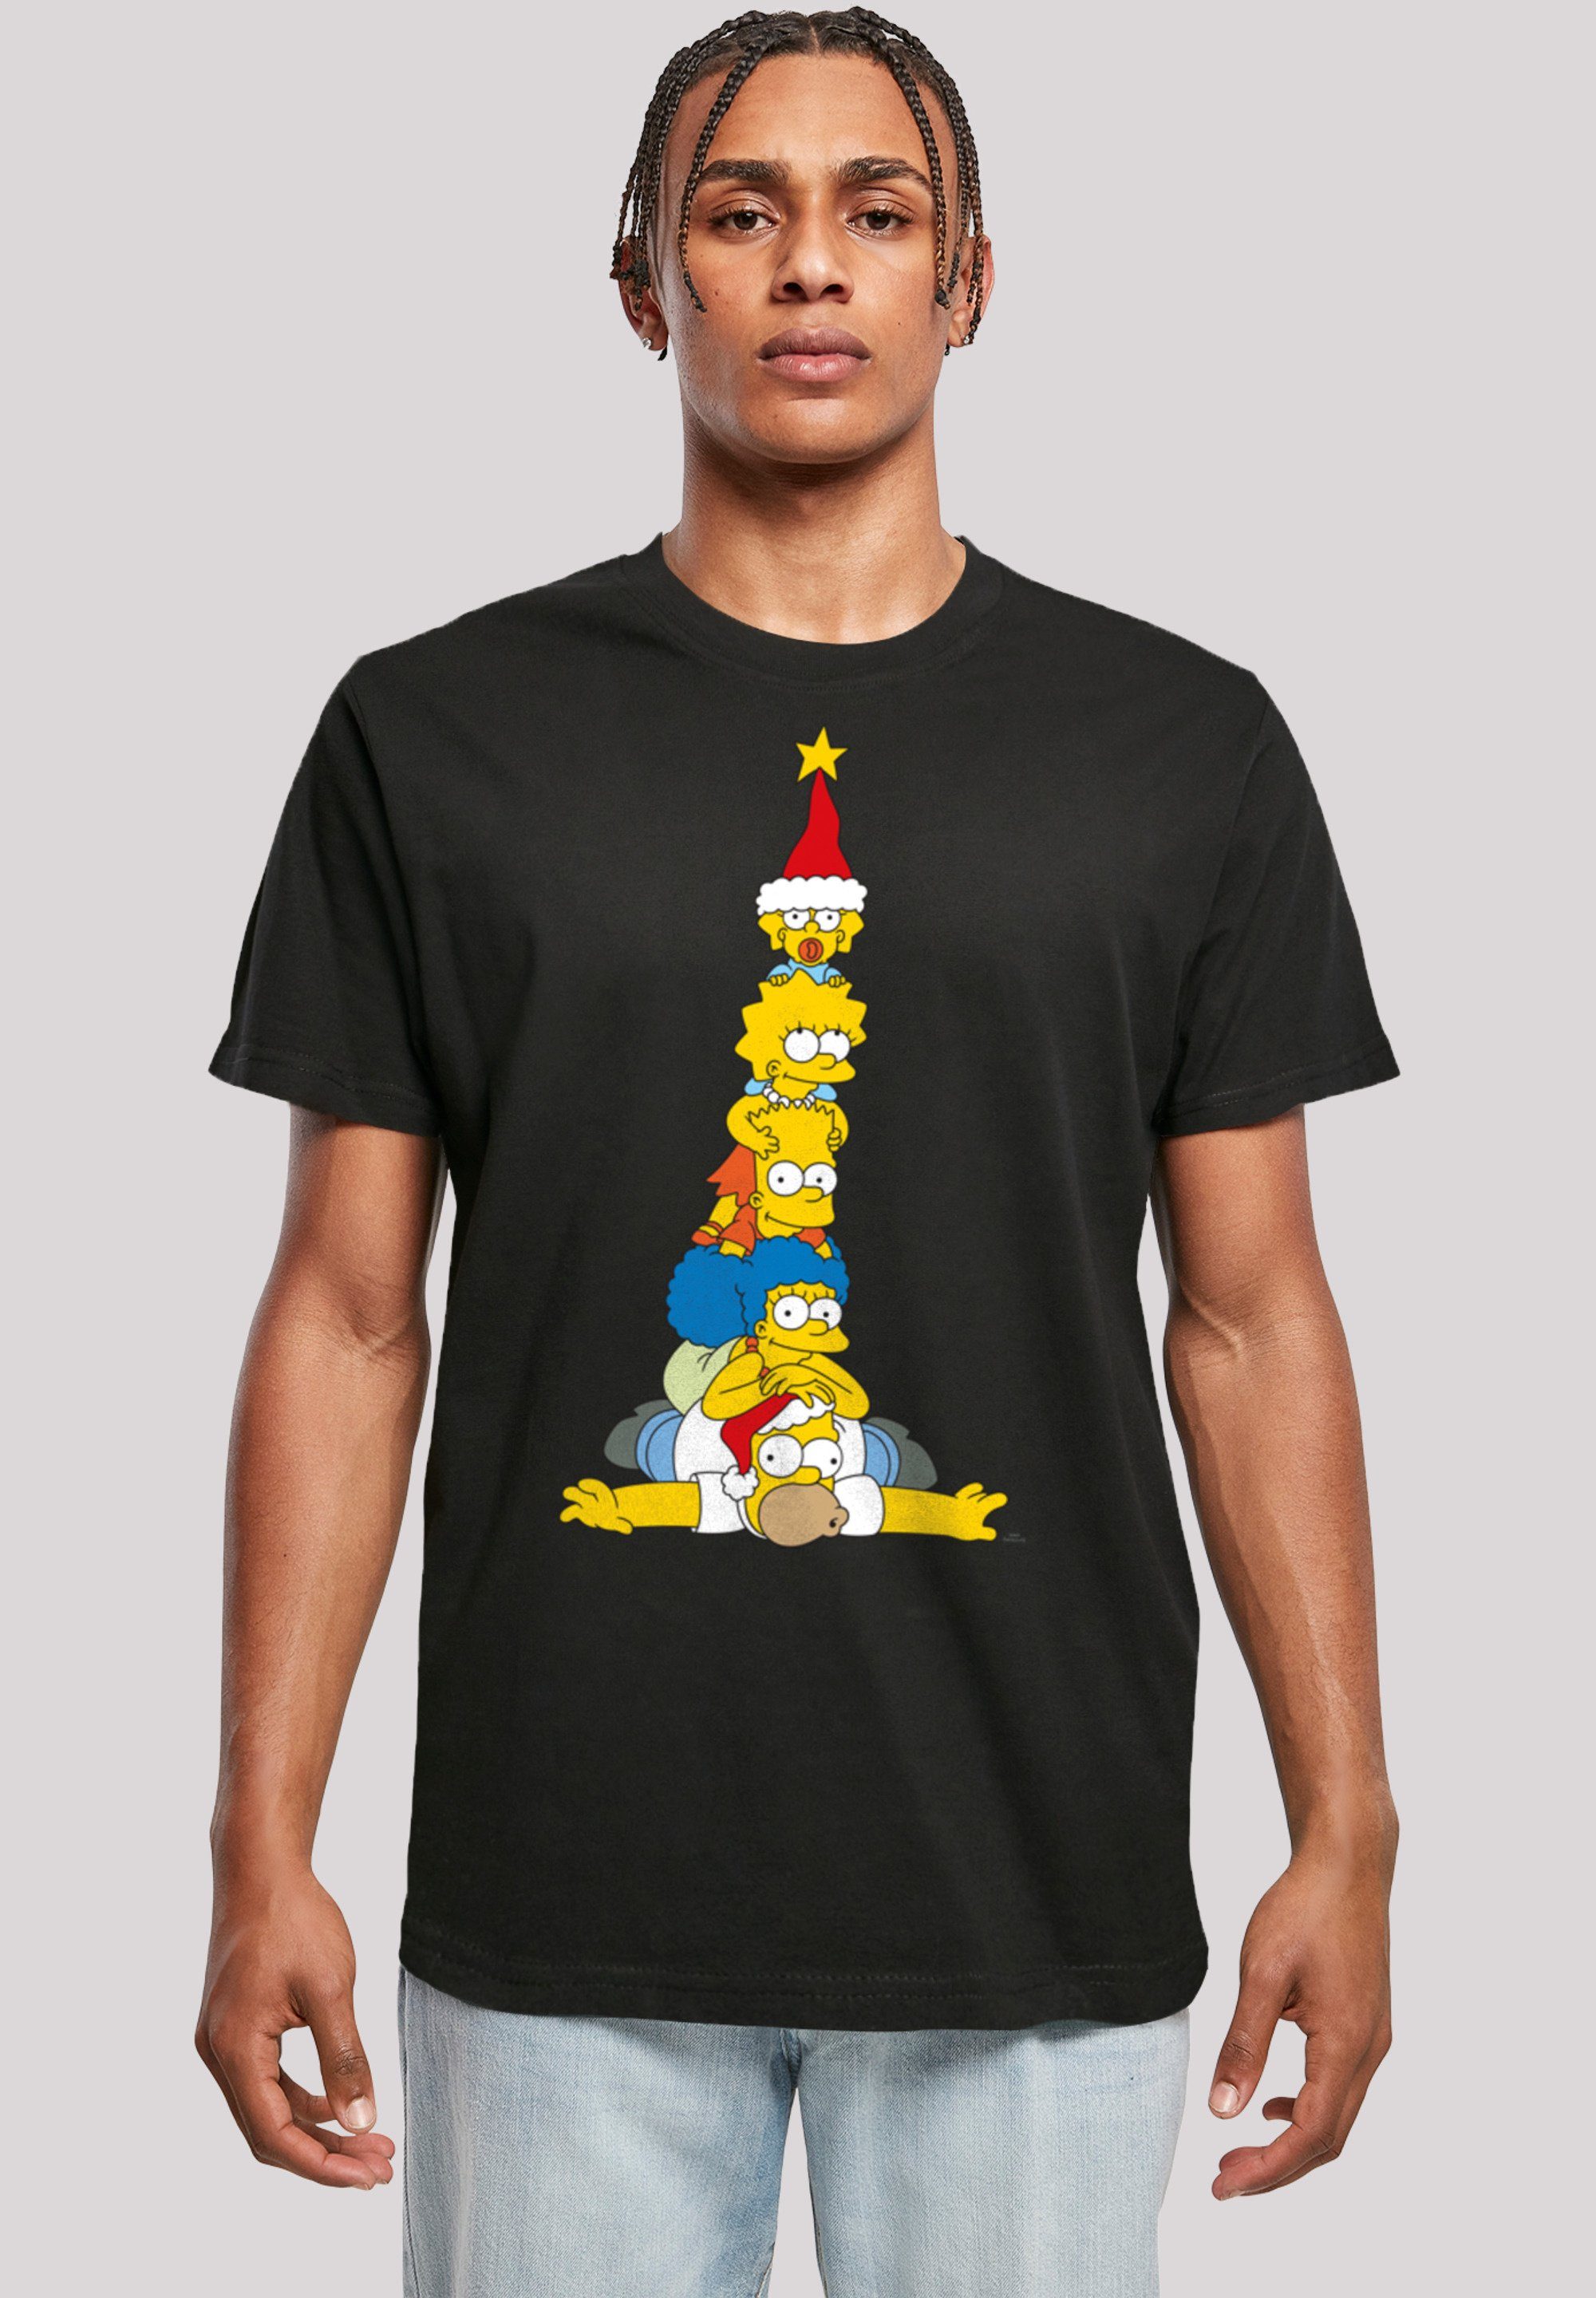 The Family Weihnachtsbaum T-Shirt Simpsons Print Christmas schwarz F4NT4STIC